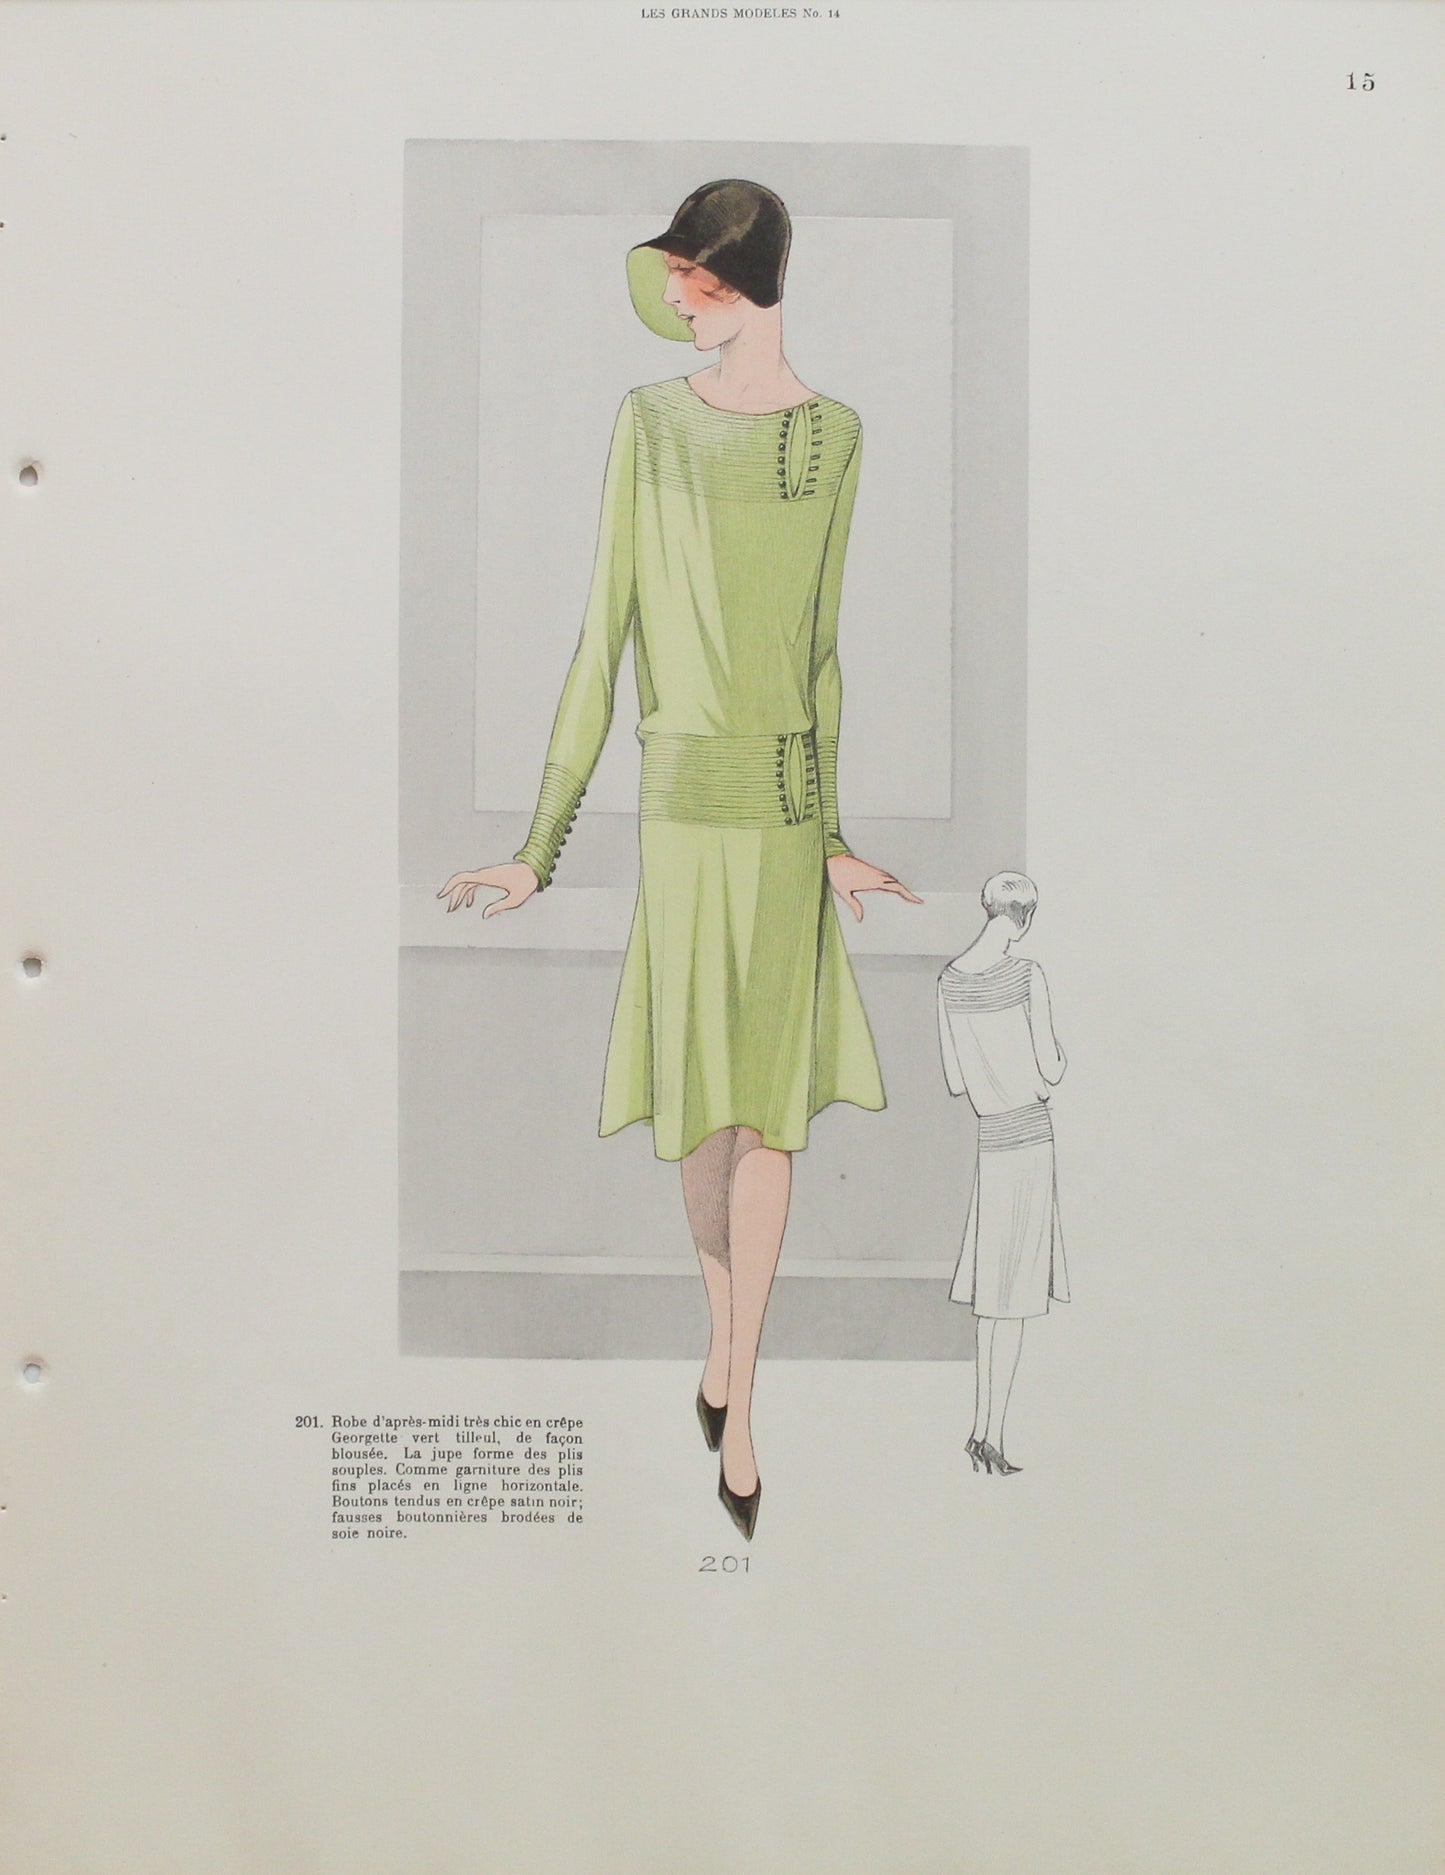 Fashion, Les Grands Models, #14, Page 15, Outfit 201, 1920 - 1929